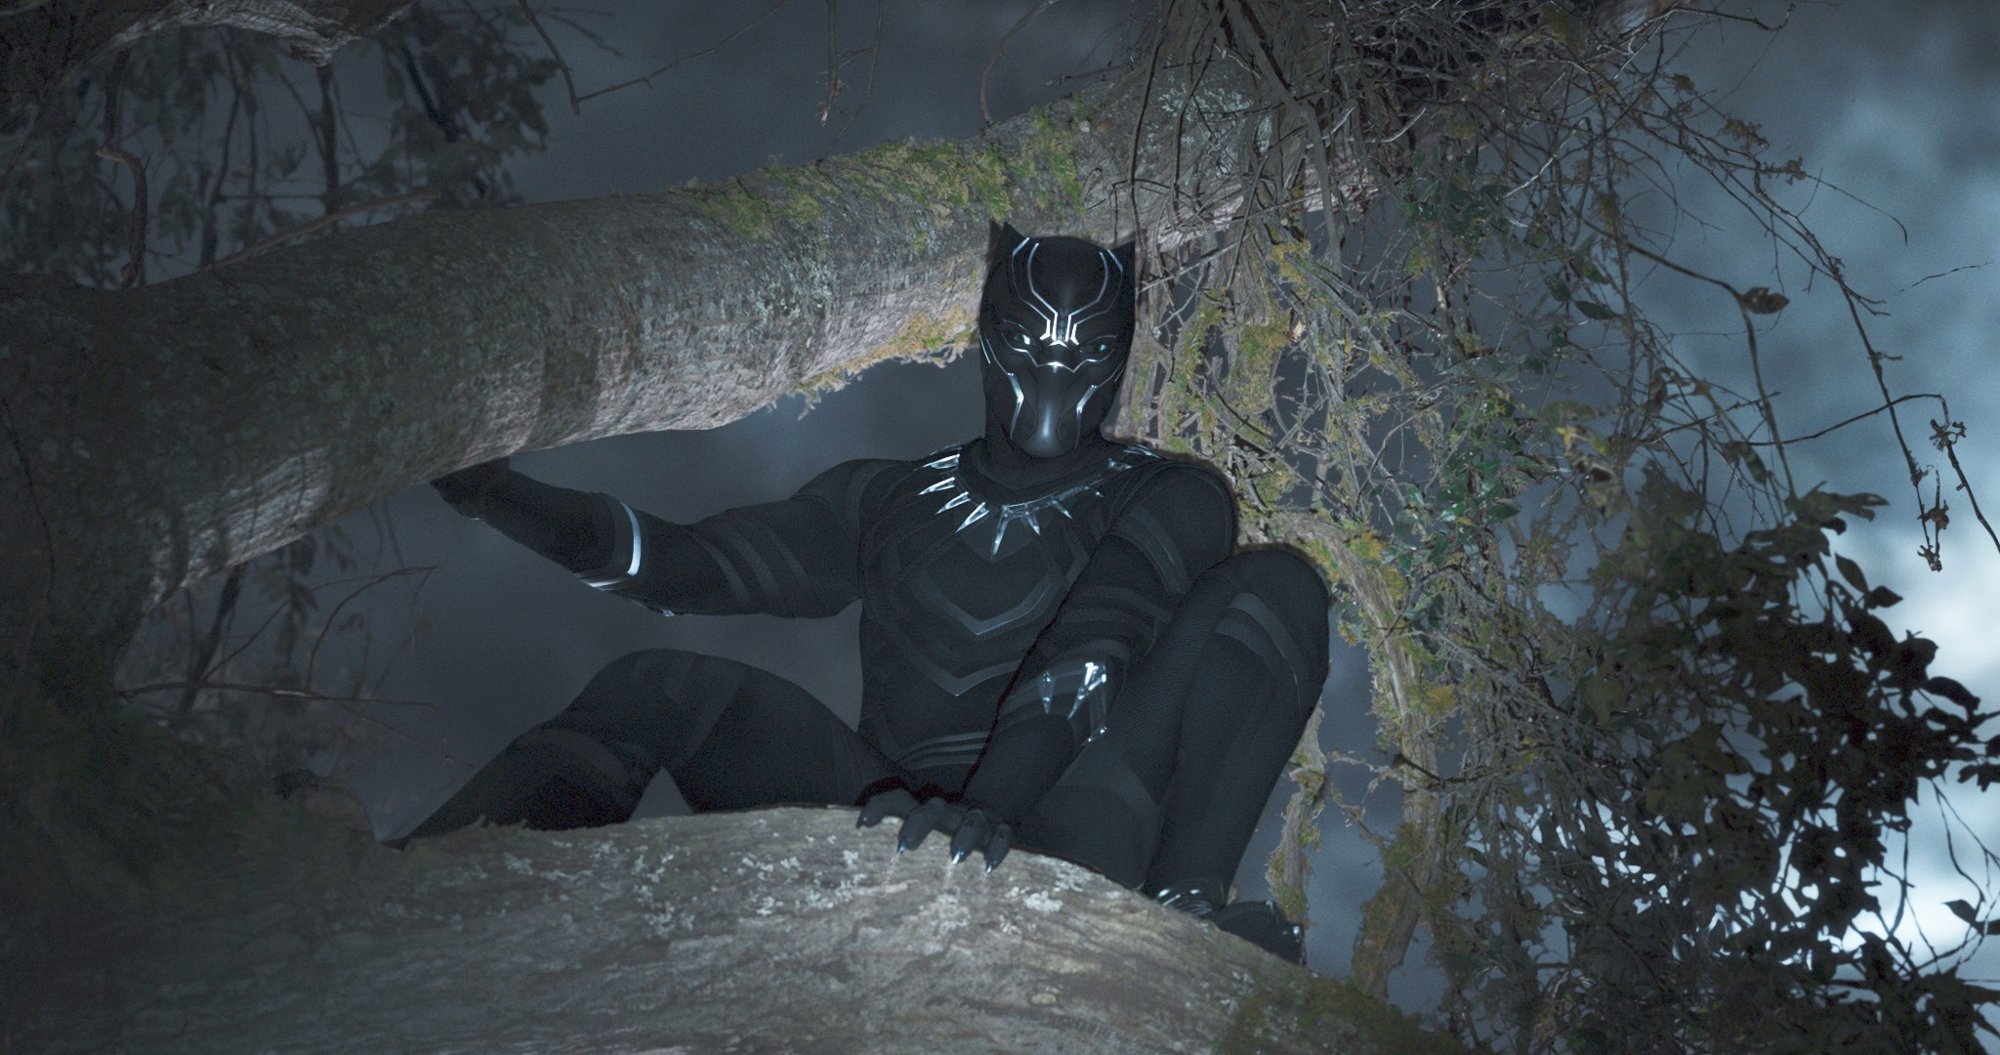 Black Panther from Walt Disney Pictures' Black Panther (2018)